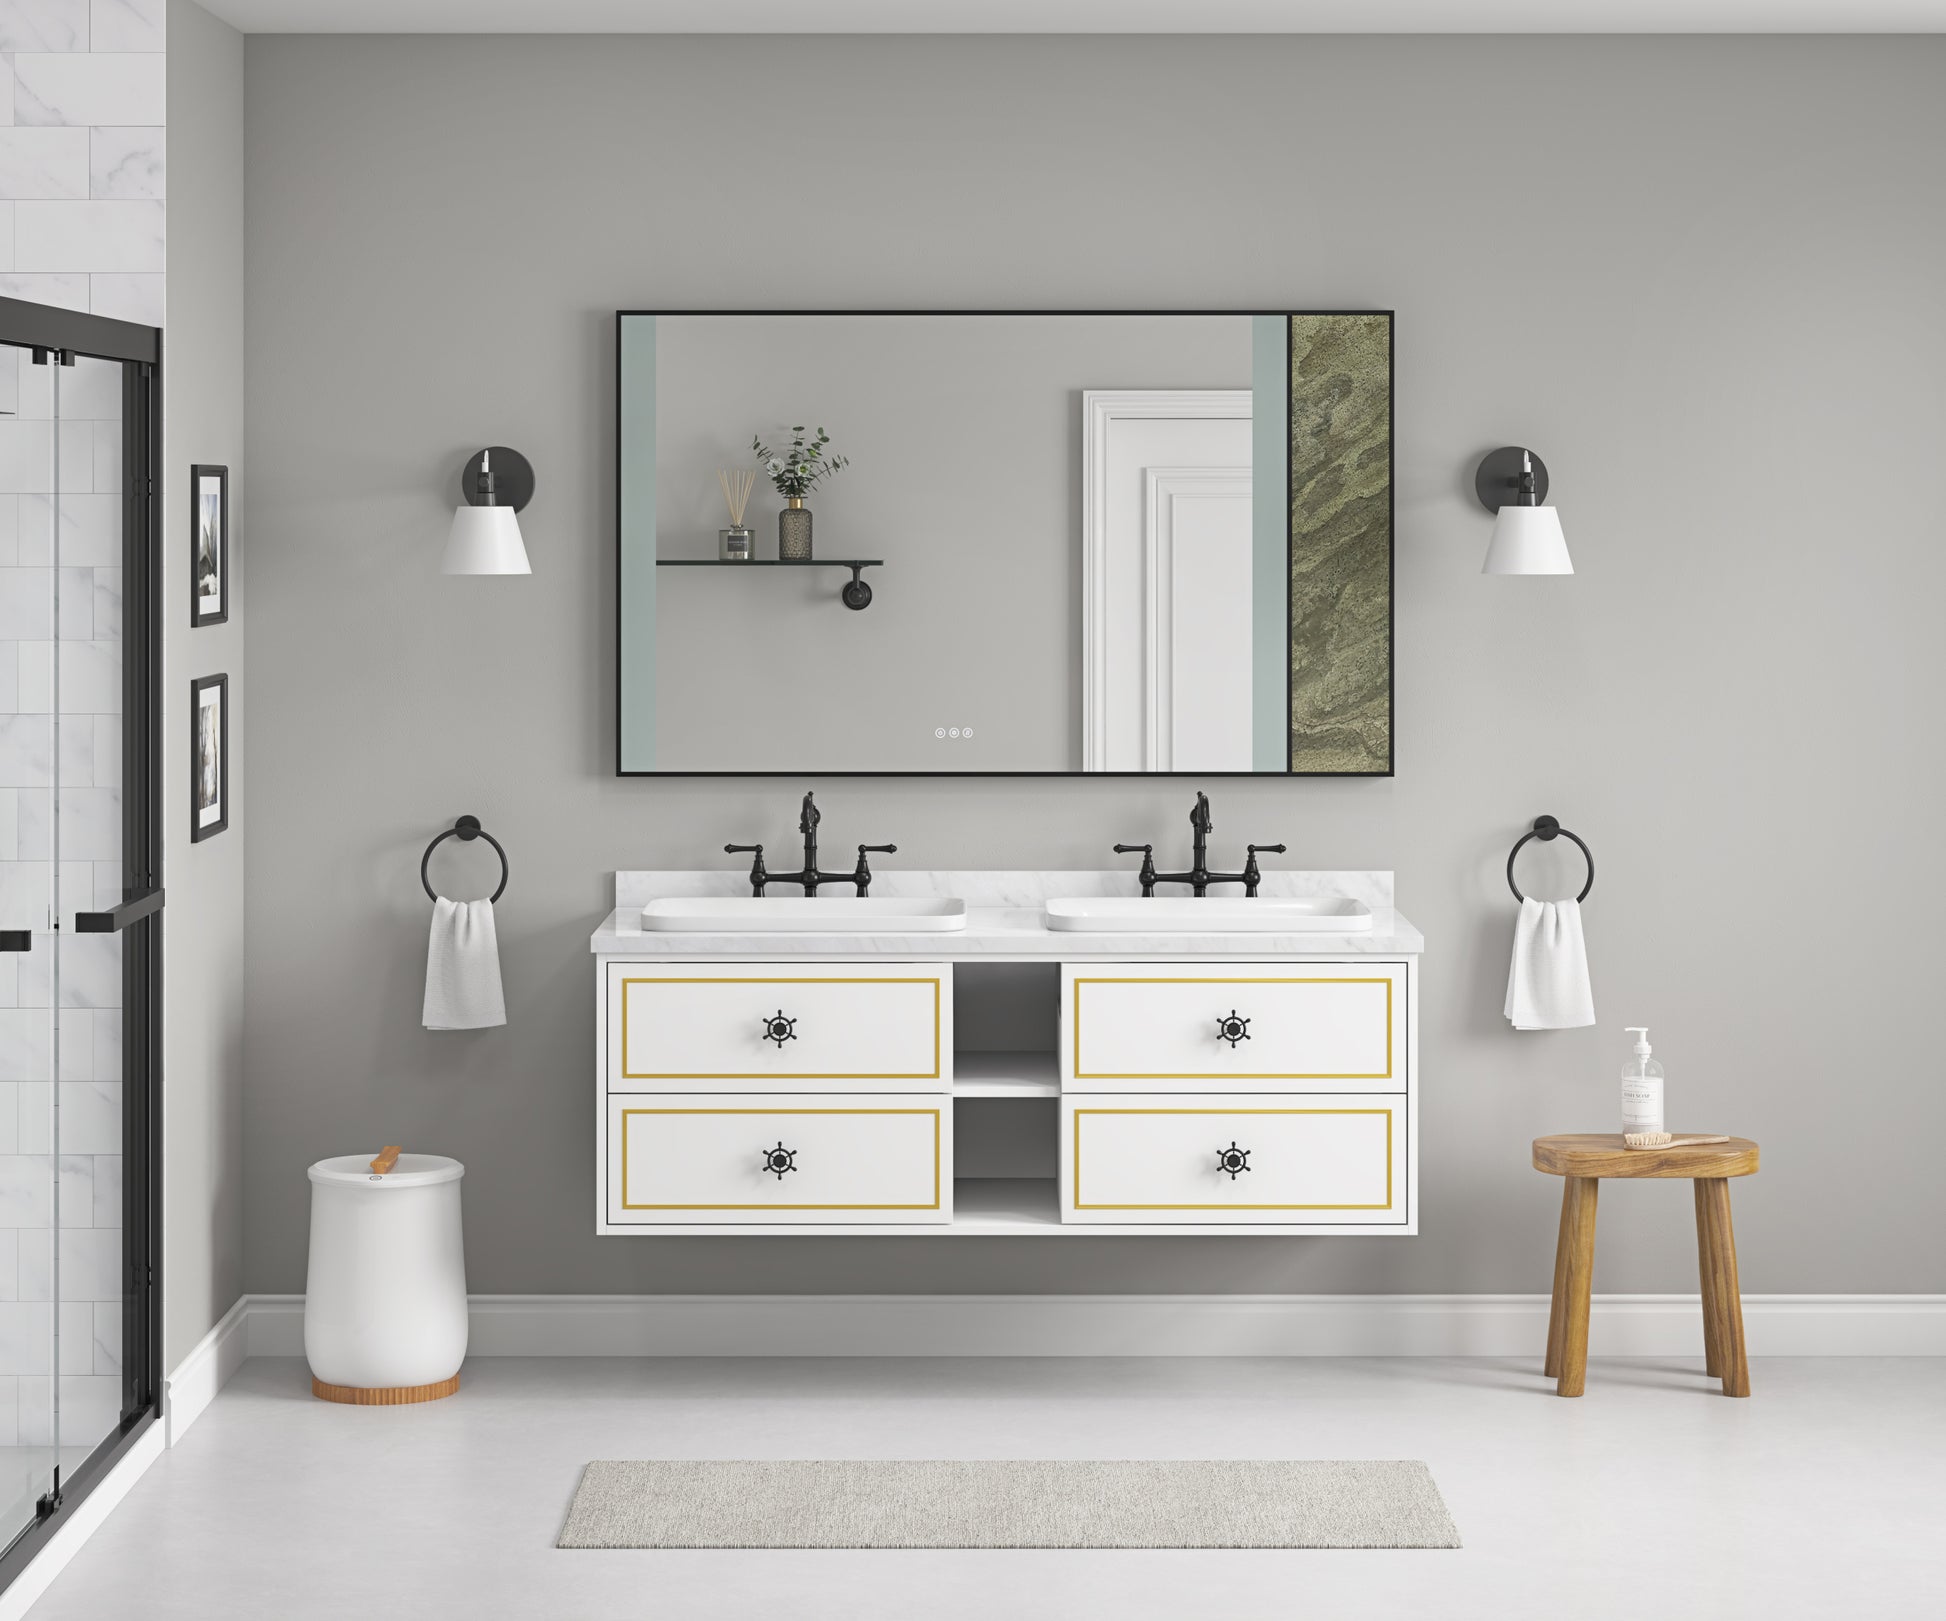 Wall Hung Doulble Sink Bath Vanity Cabinet Only in white-abs+steel(q235)+wood+pvc